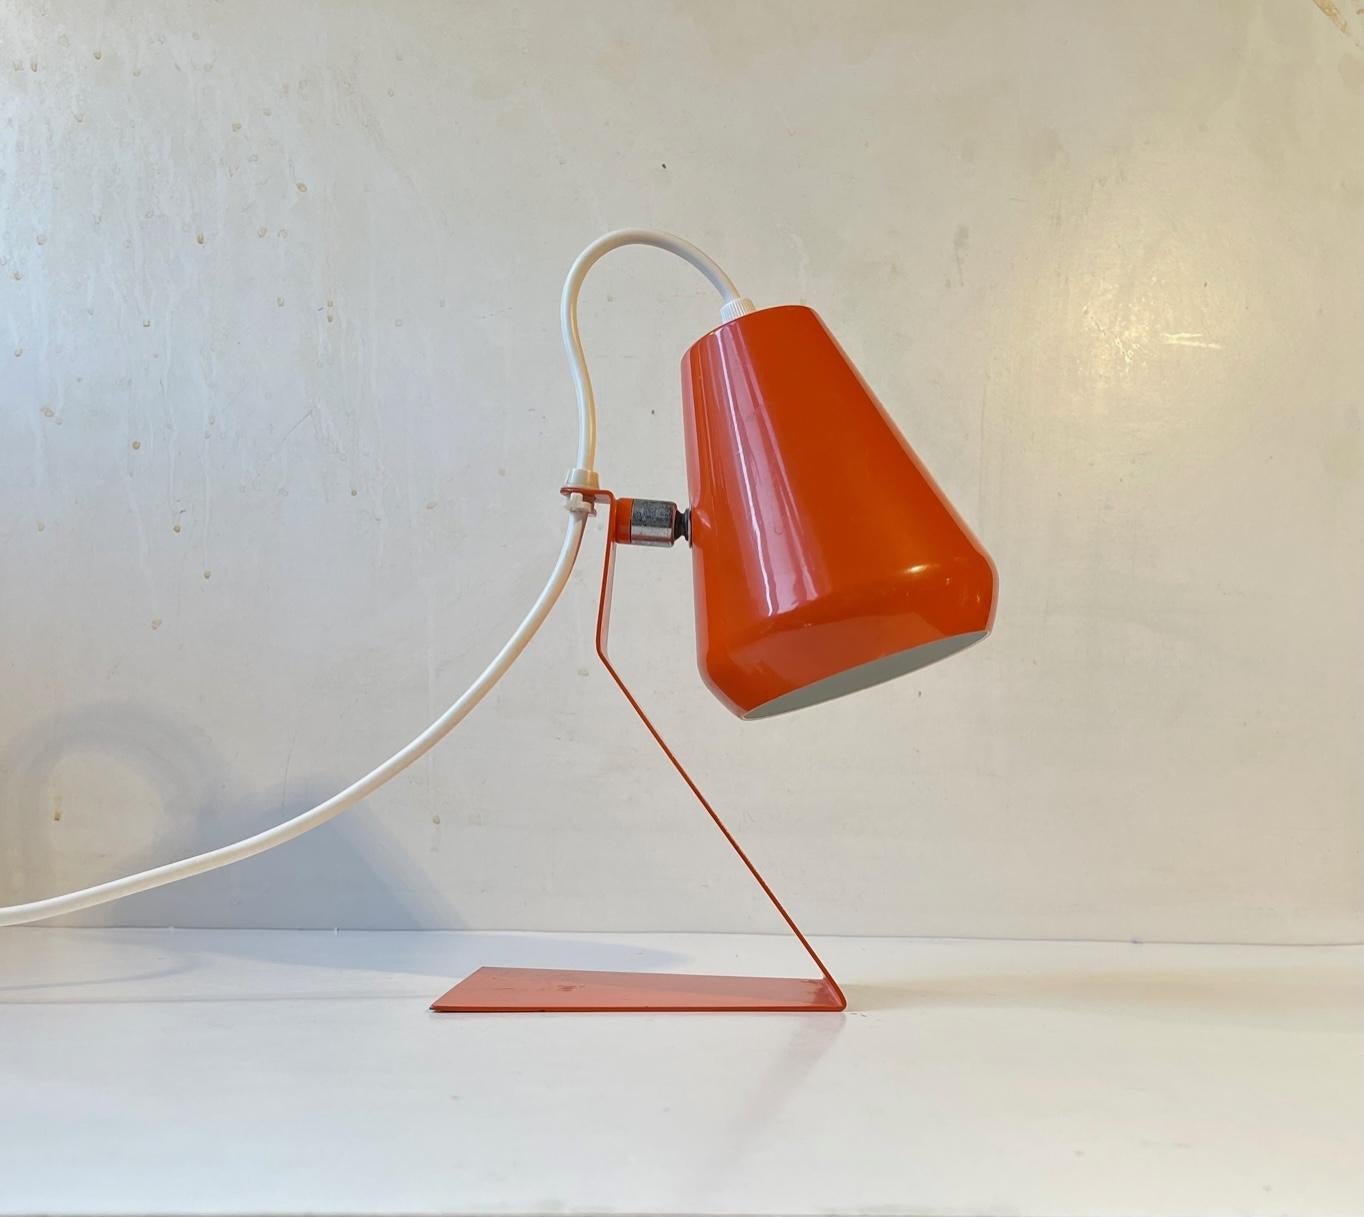 Small Orange Midcentury Table Lamp, Italian, 1960s In Good Condition For Sale In Esbjerg, DK